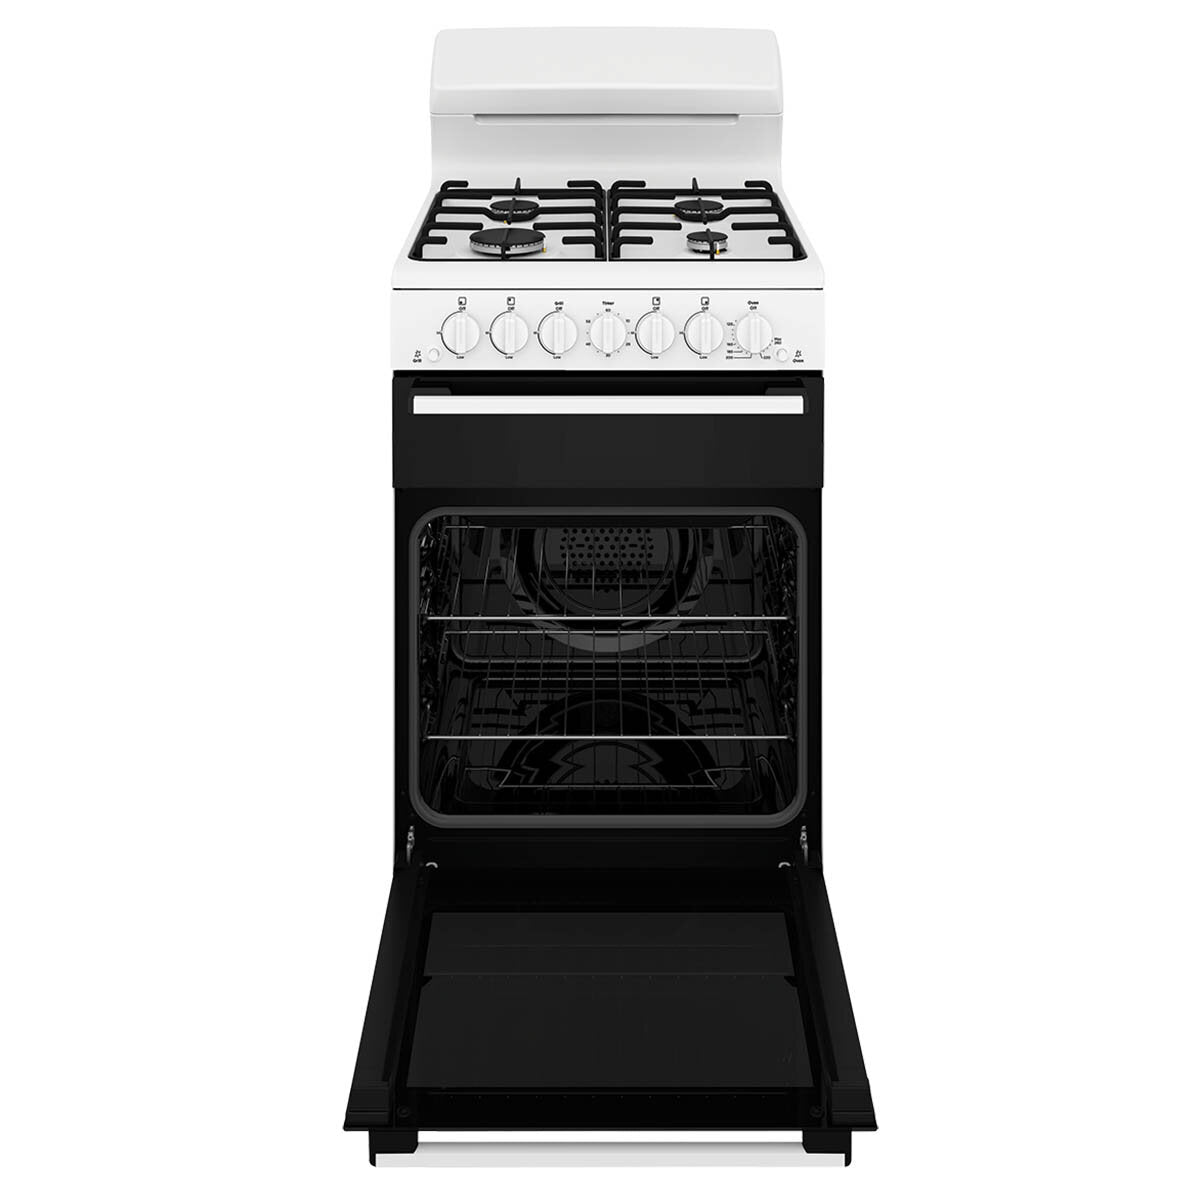 westinghouse-54cm-freestanding-natural-gas-ovenstove-wlg510wcng-2-83f926a1-high